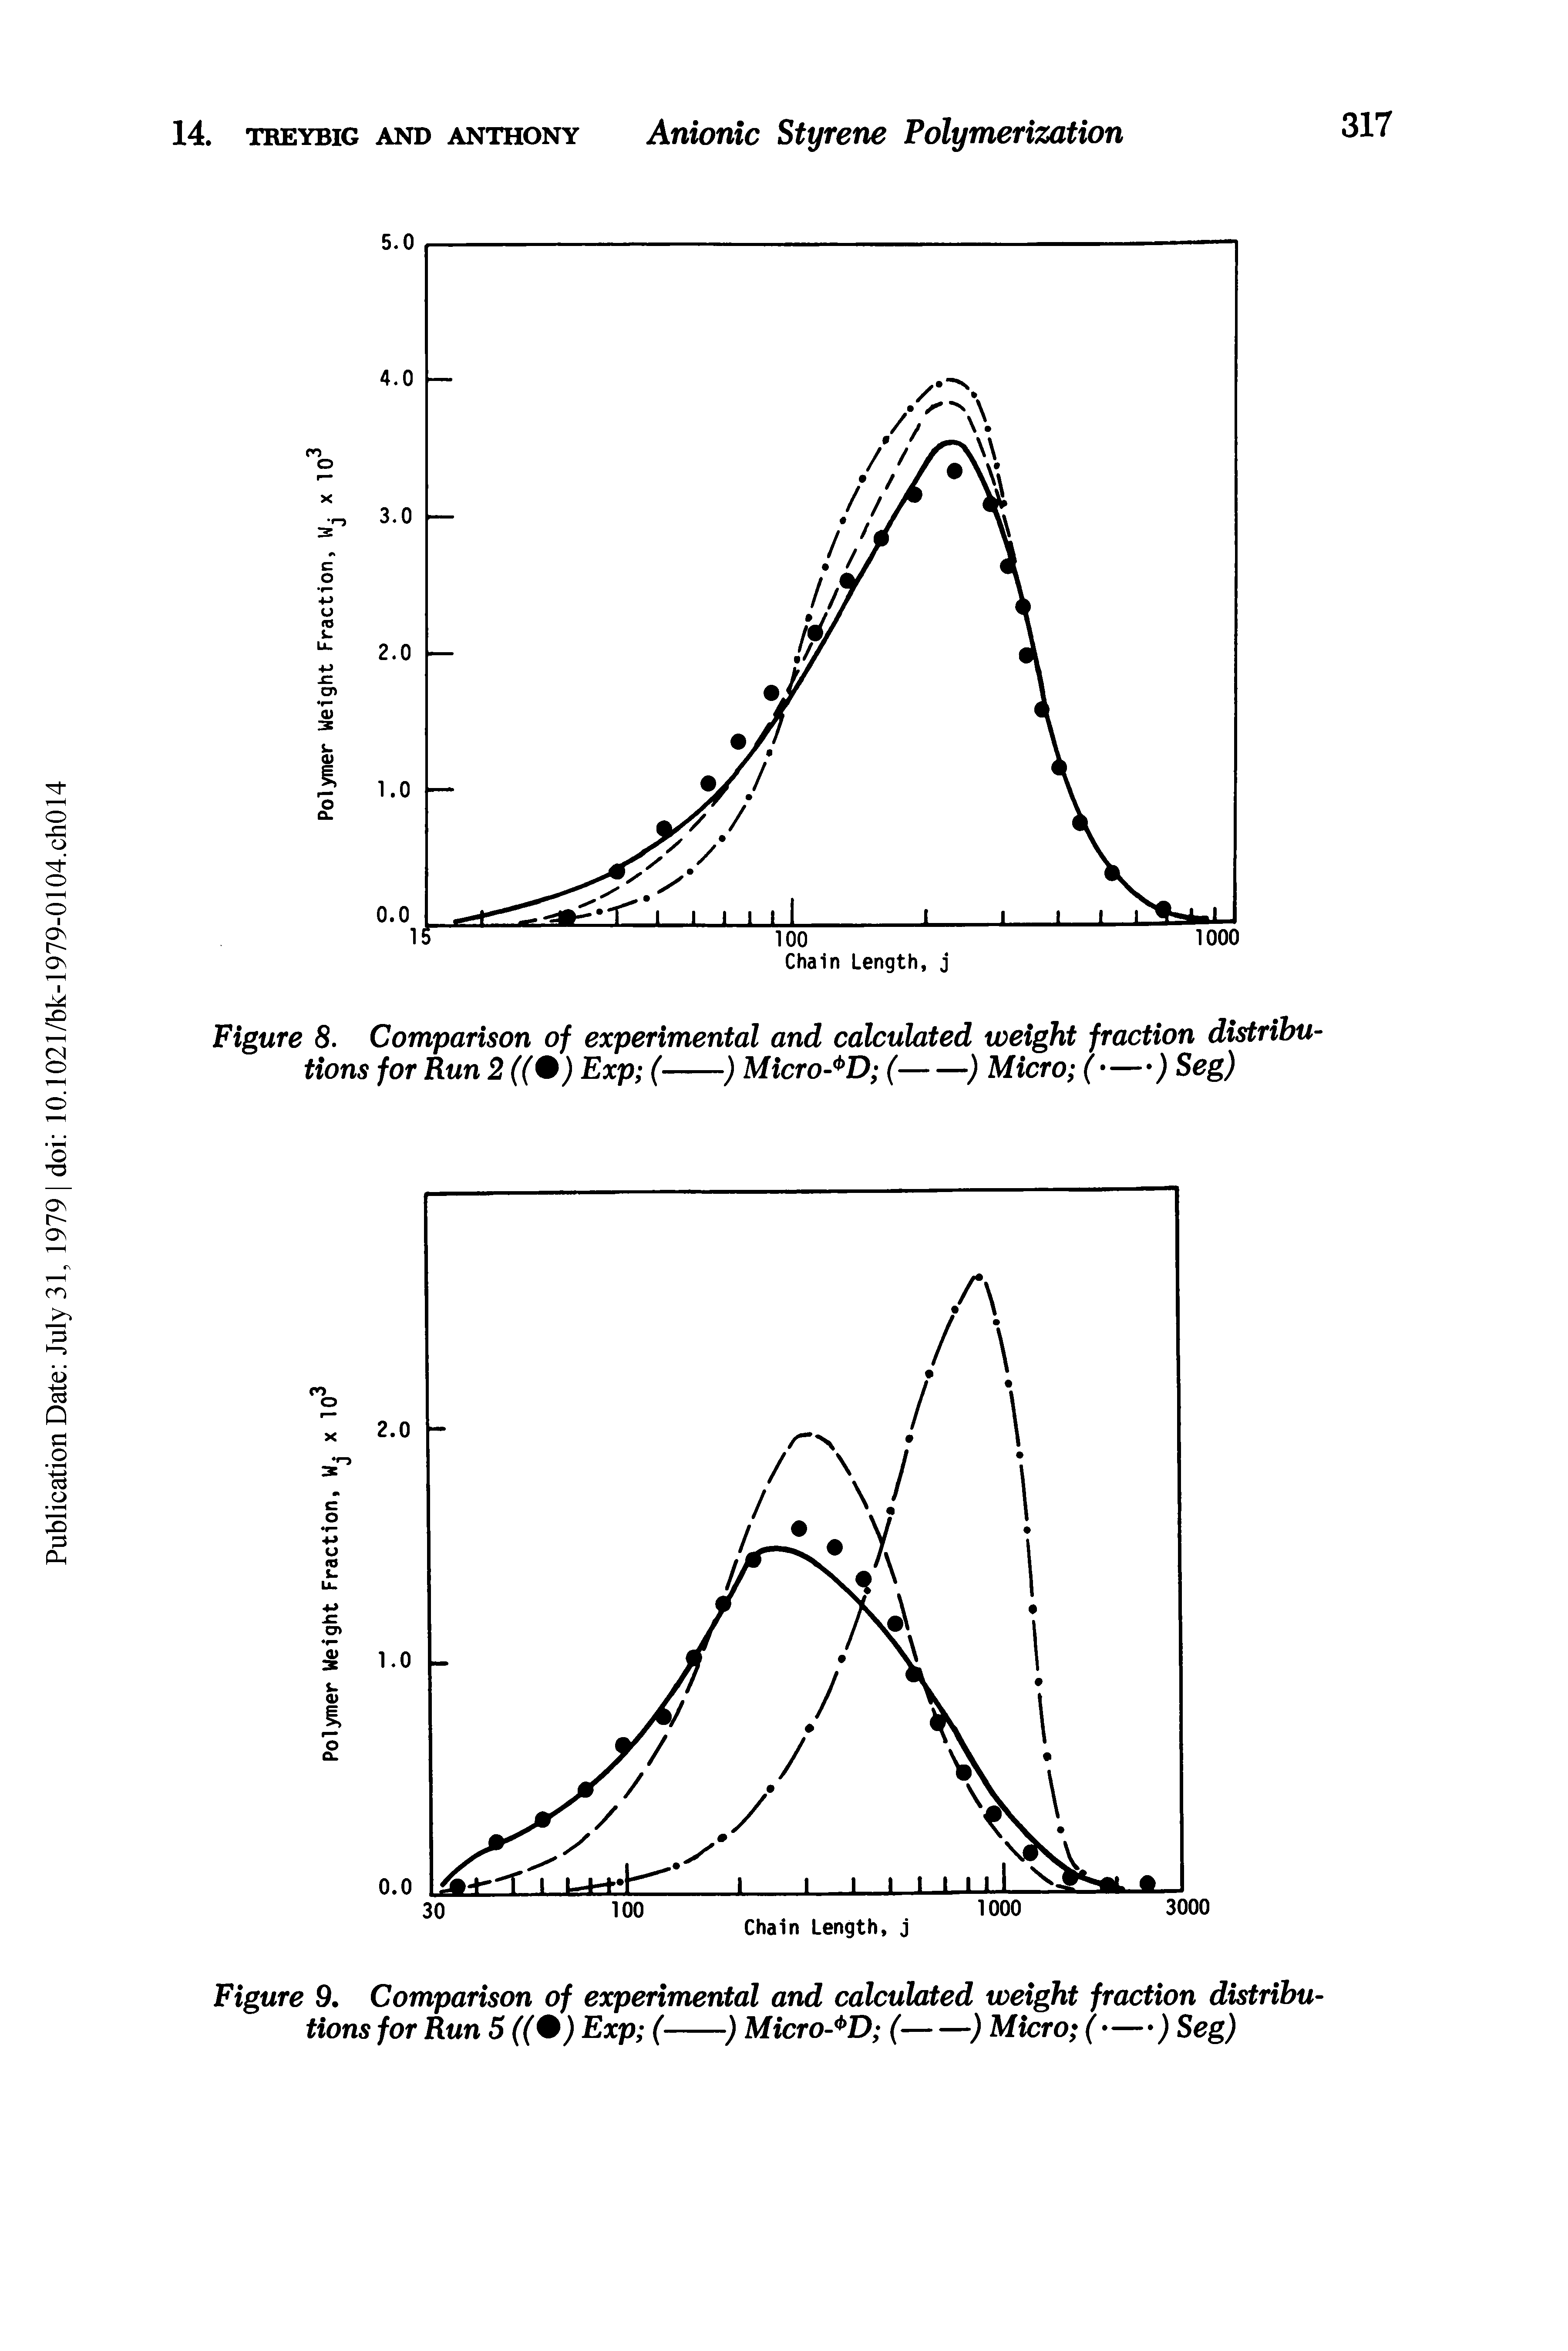 Figure 8. Comparison of experimental and calculated weight fraction distributions for Run 2 ((0) Exp (---------) Micro- D (---) Micro (---) Seg)...